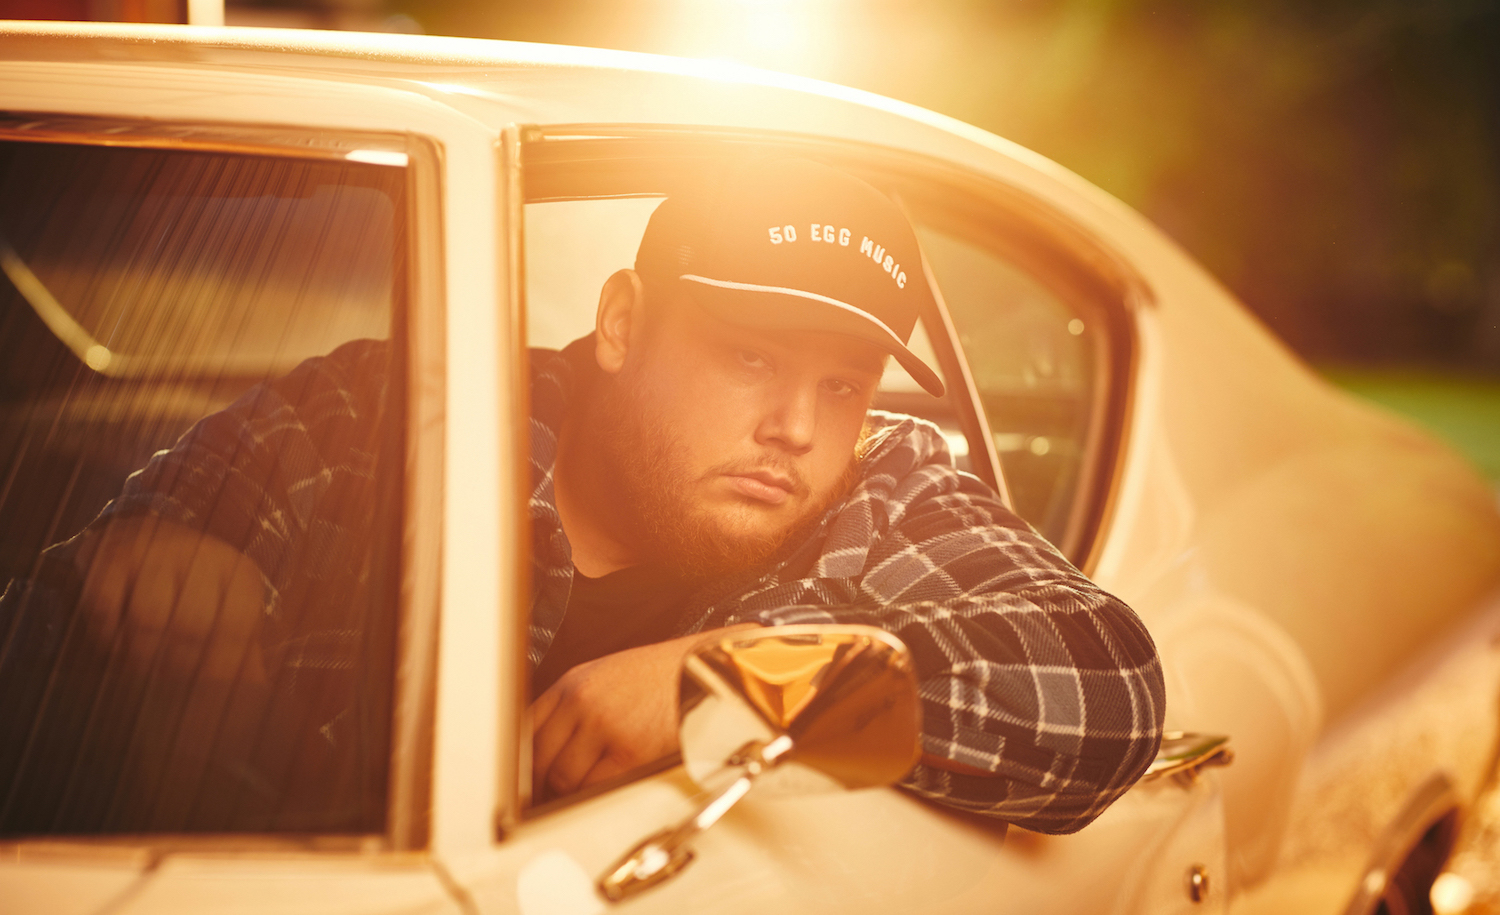 Luke Combs claims first ever country airplay #1 in Australia